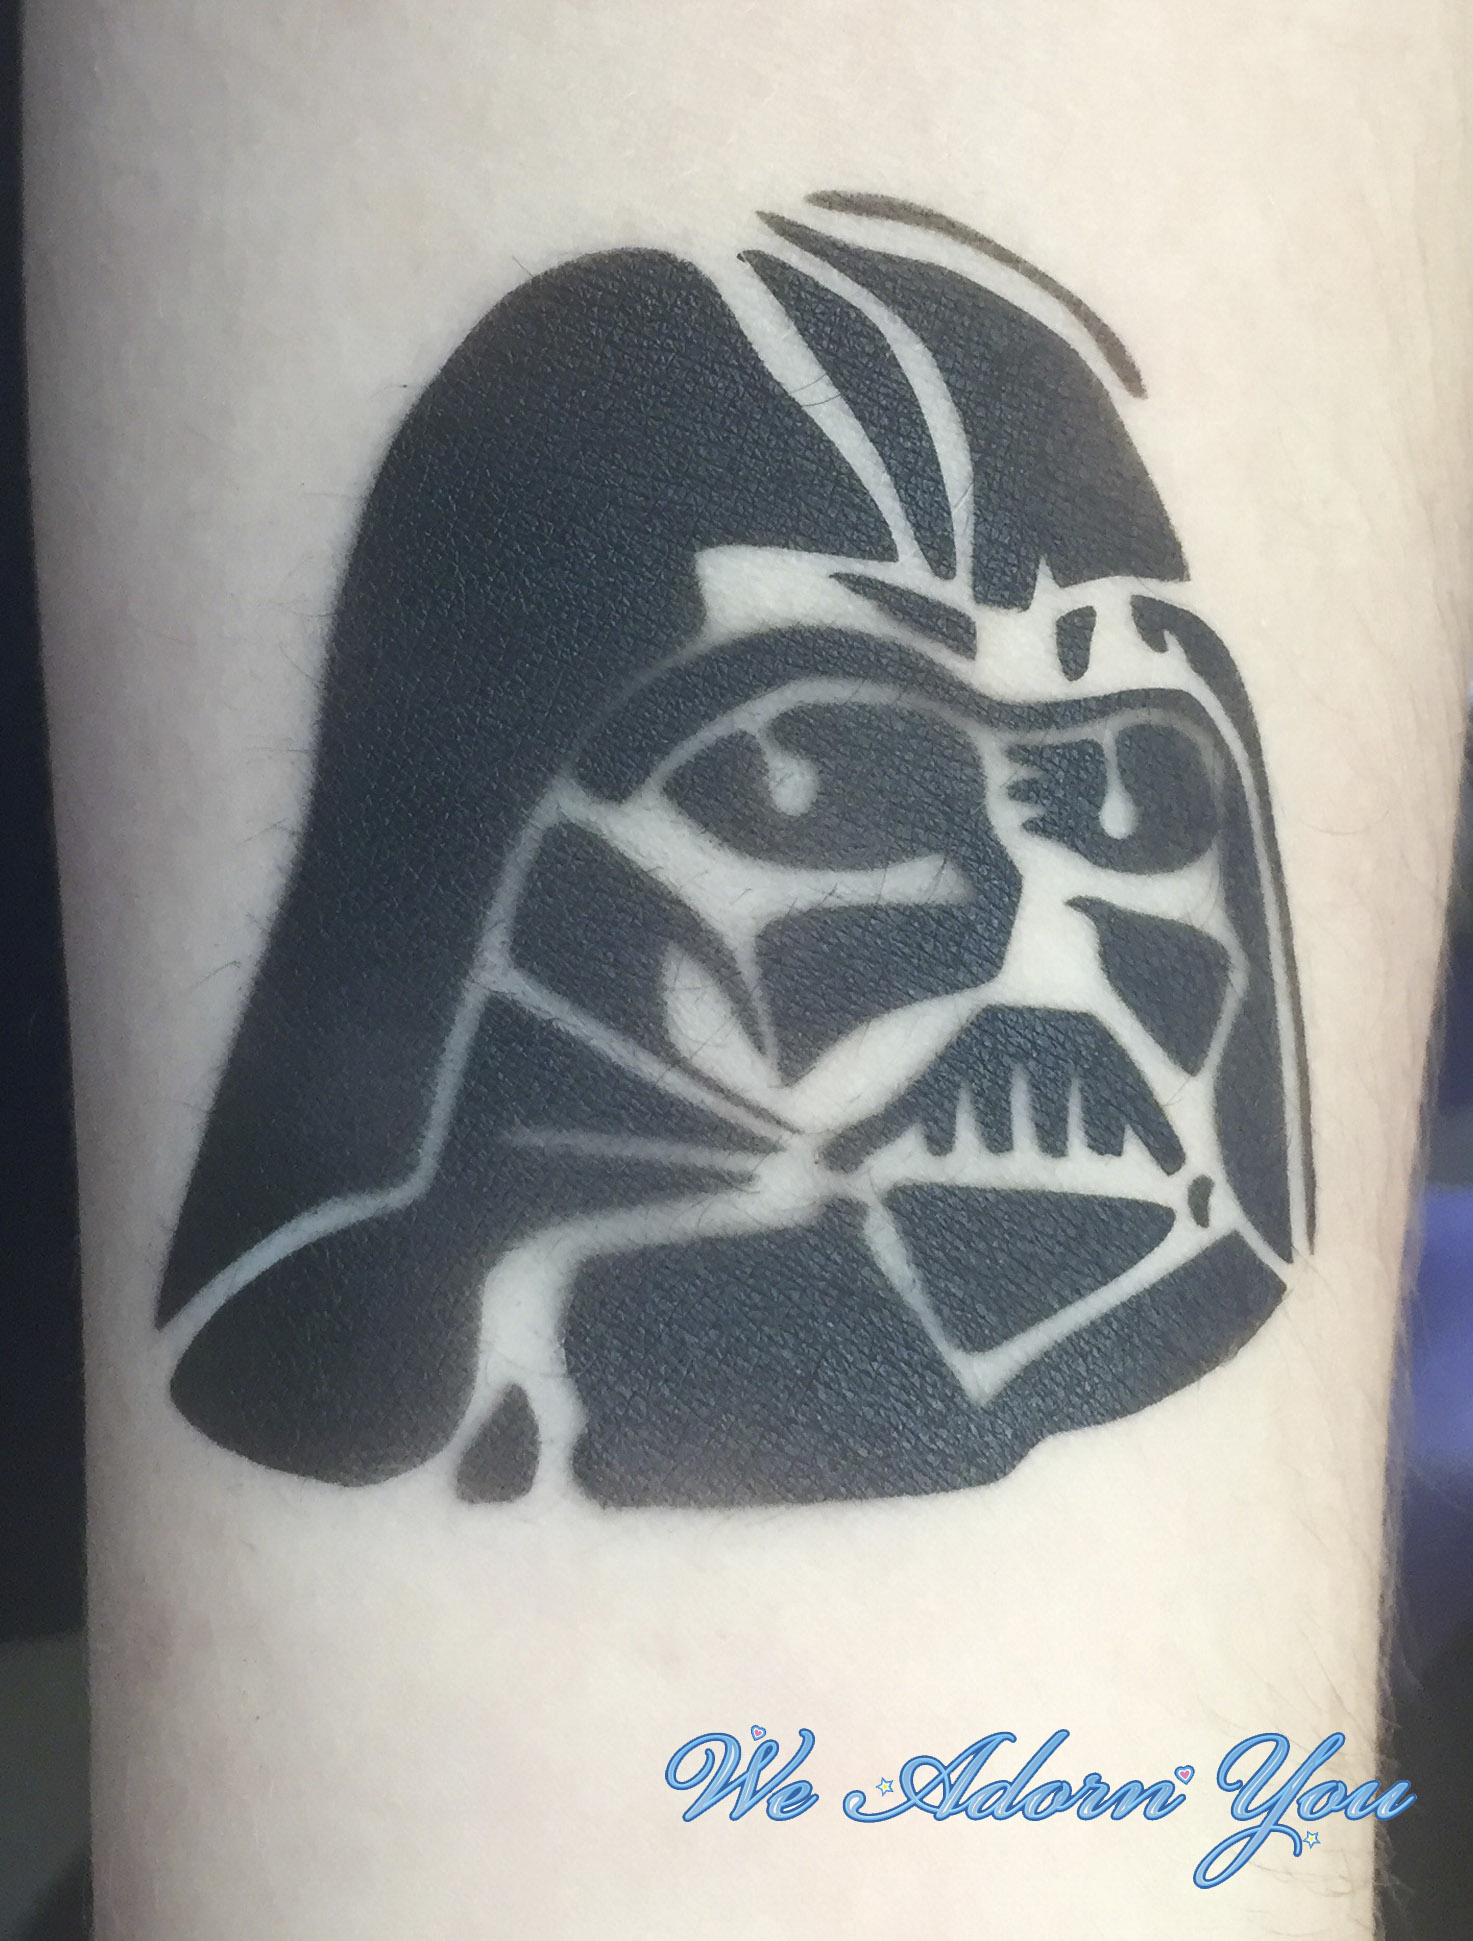 The Ultimate Darth Vader Tattoo Ideas Across the Universe  The Force  Universe